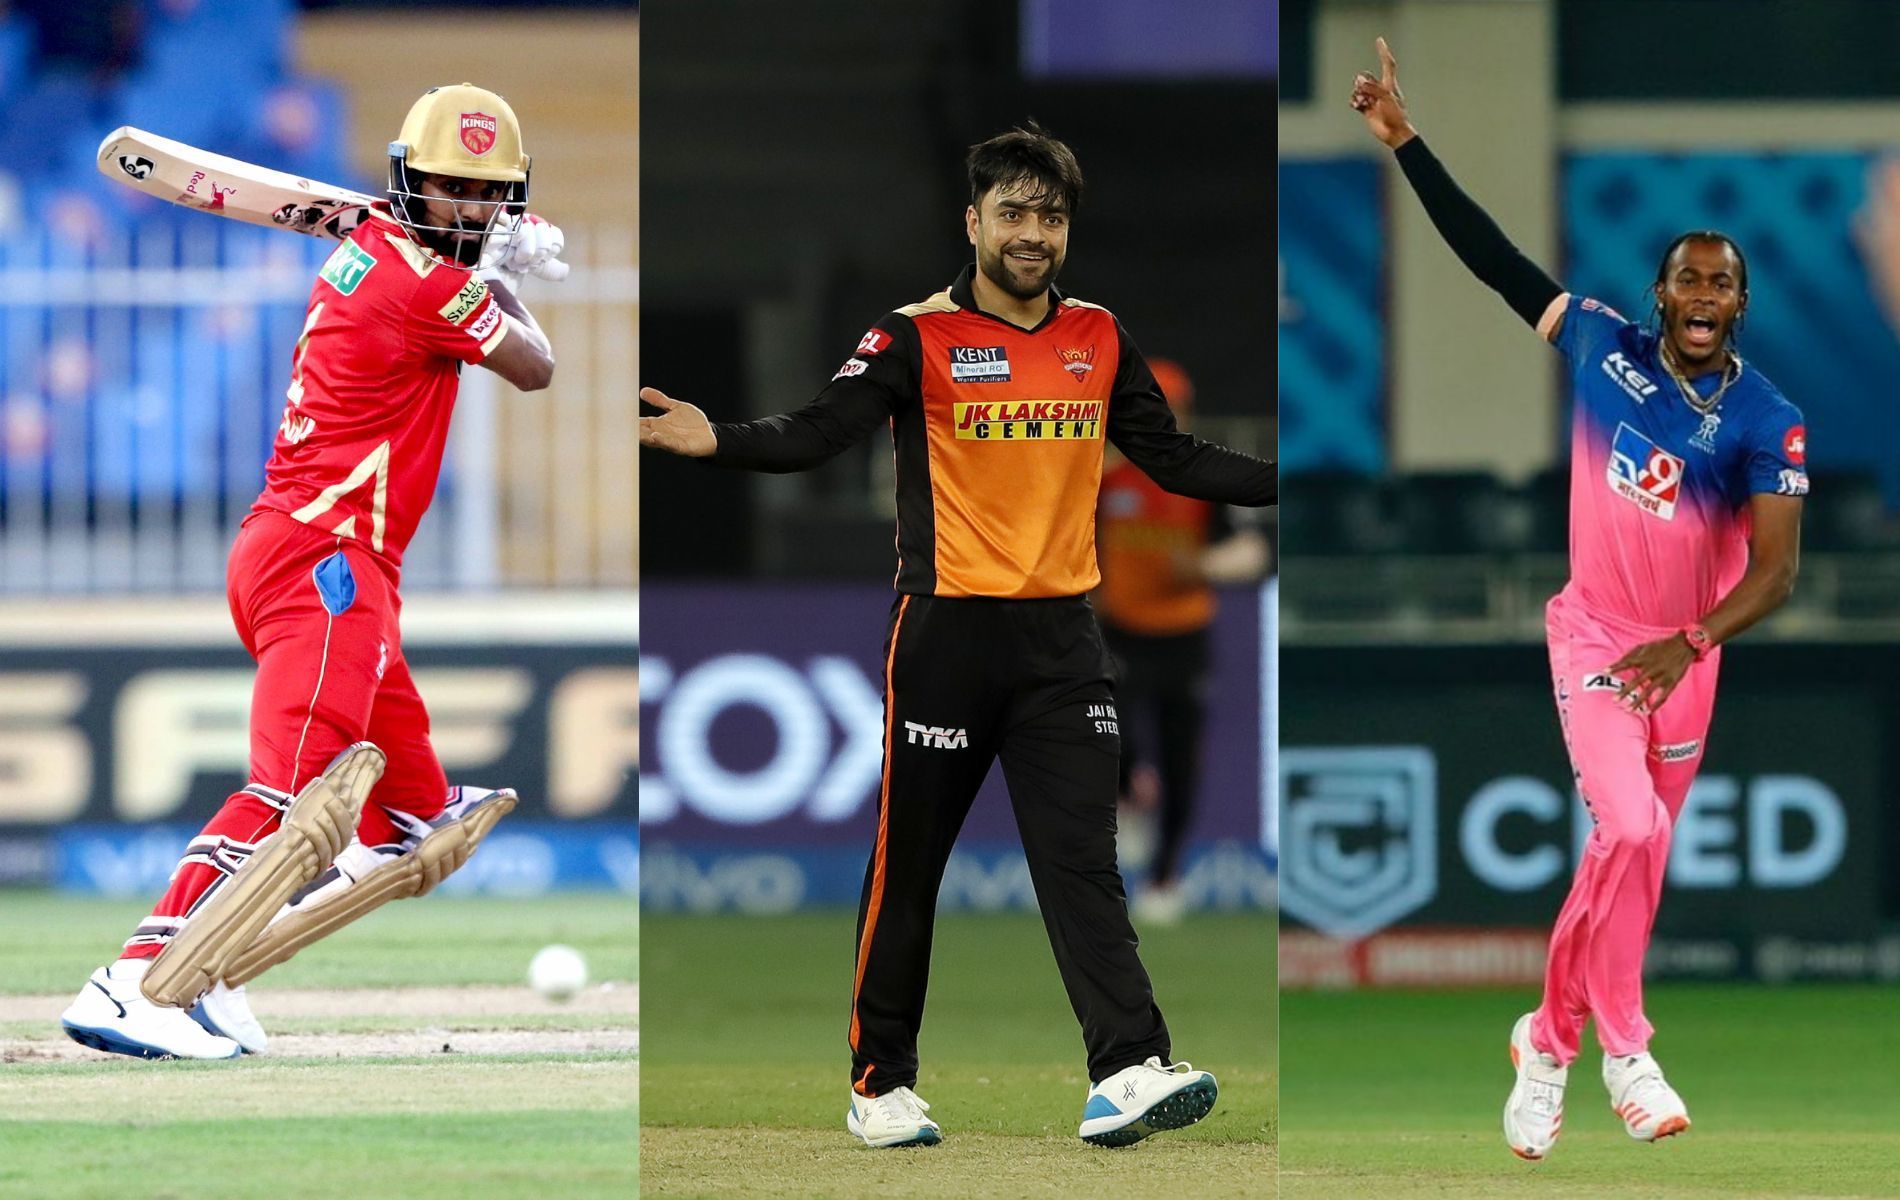 Three teams that got their retention moves wrong ahead of IPL 2022 Mega Auction.